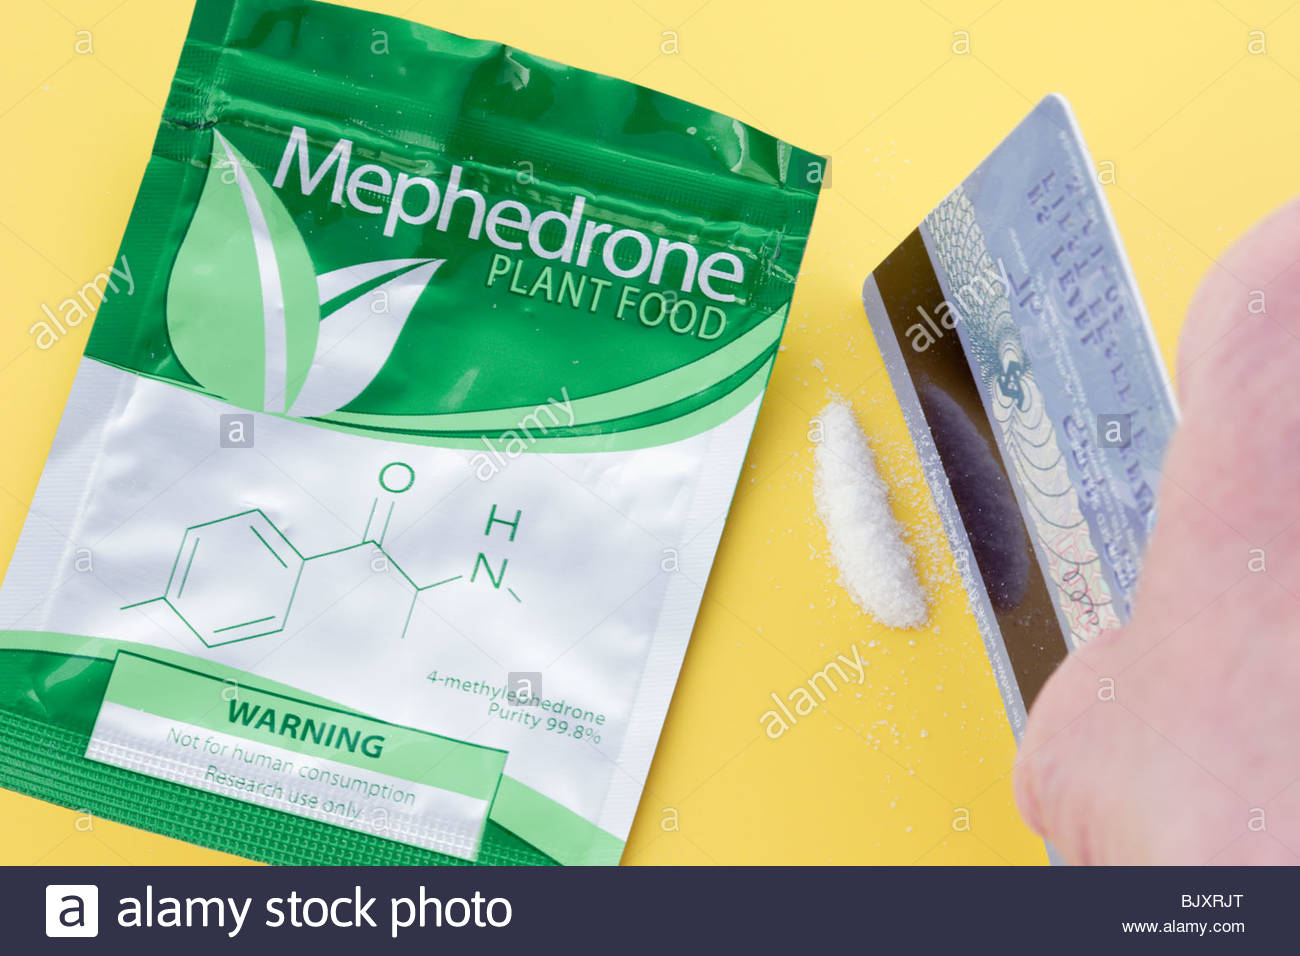 mephedrone-1-dc442a08